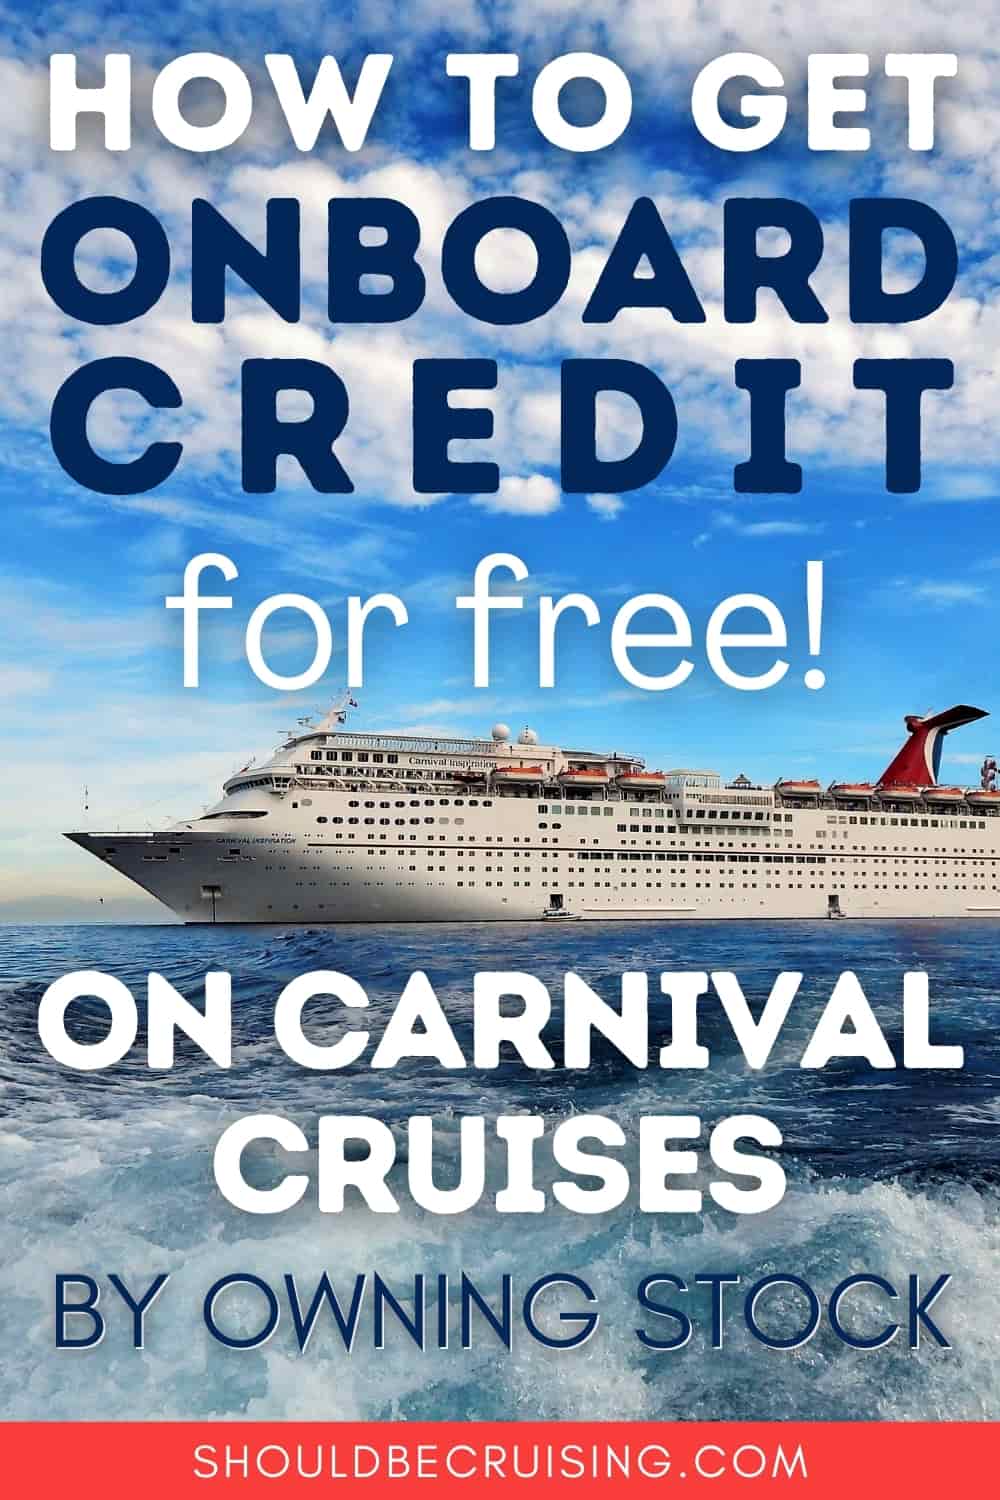 cruise discount for owning carnival stock